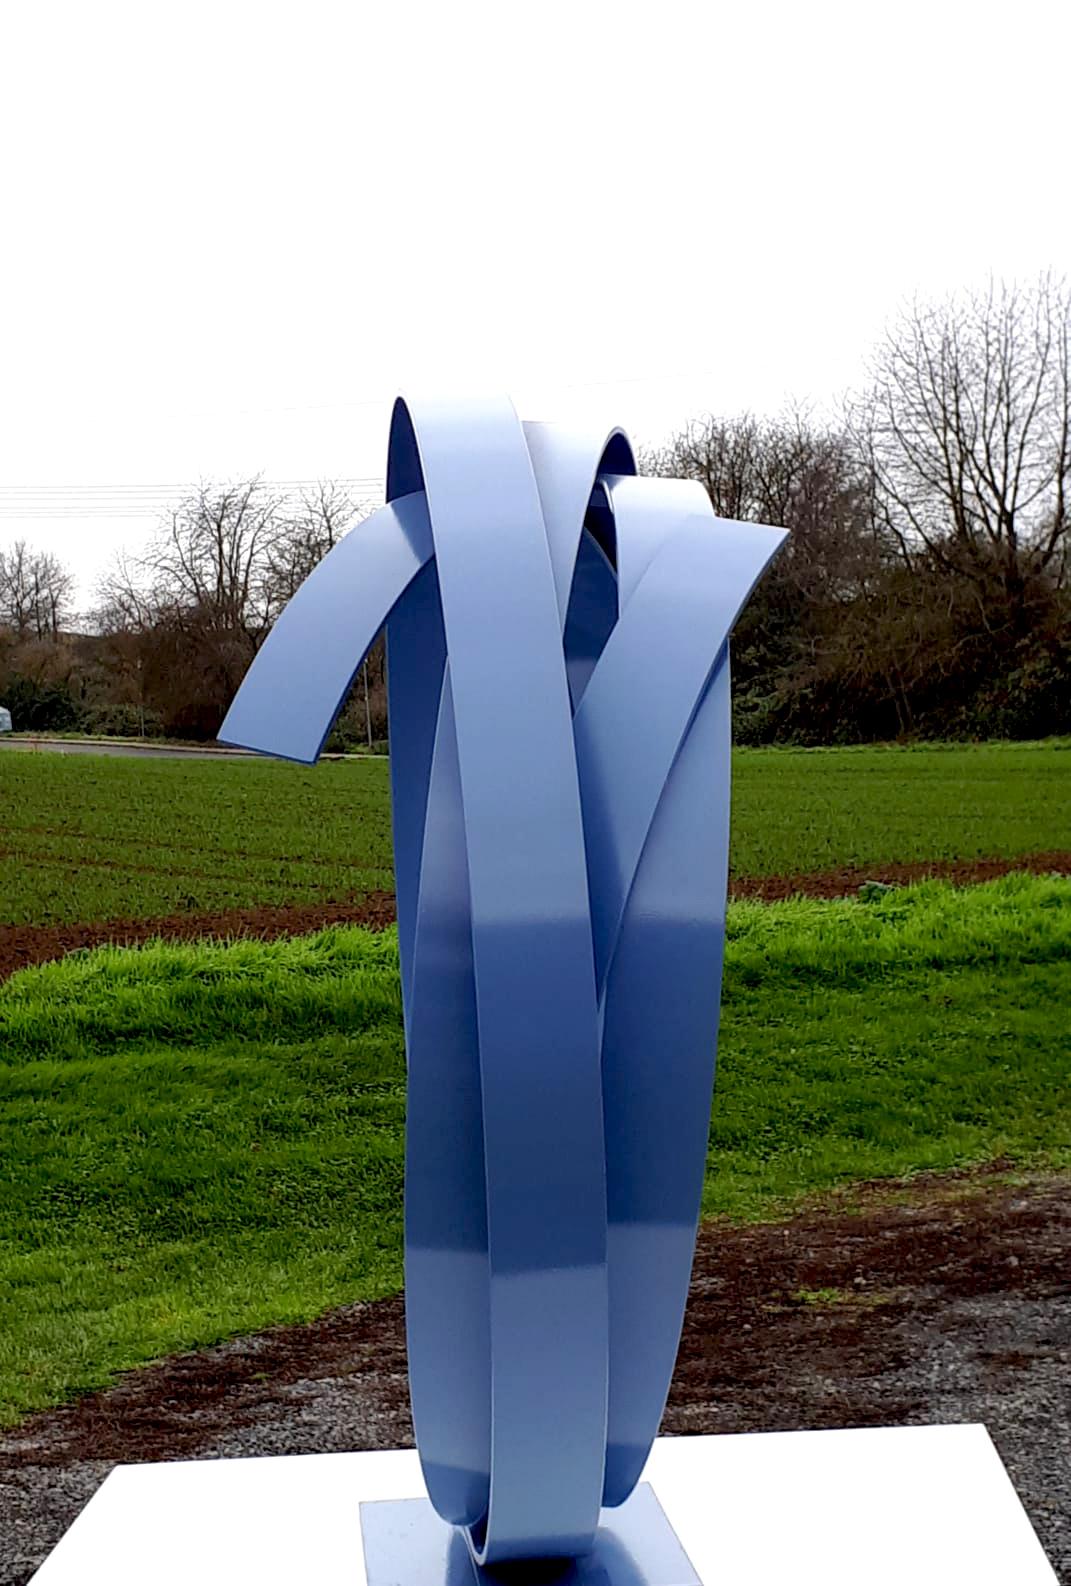 A large contemporary blue steel sculpture. Beautiful on the floor or a pedestal. 
A contemporary statement piece full of elegance and movement.
_______________________________________________________________________

About the Gallery:
Folly and